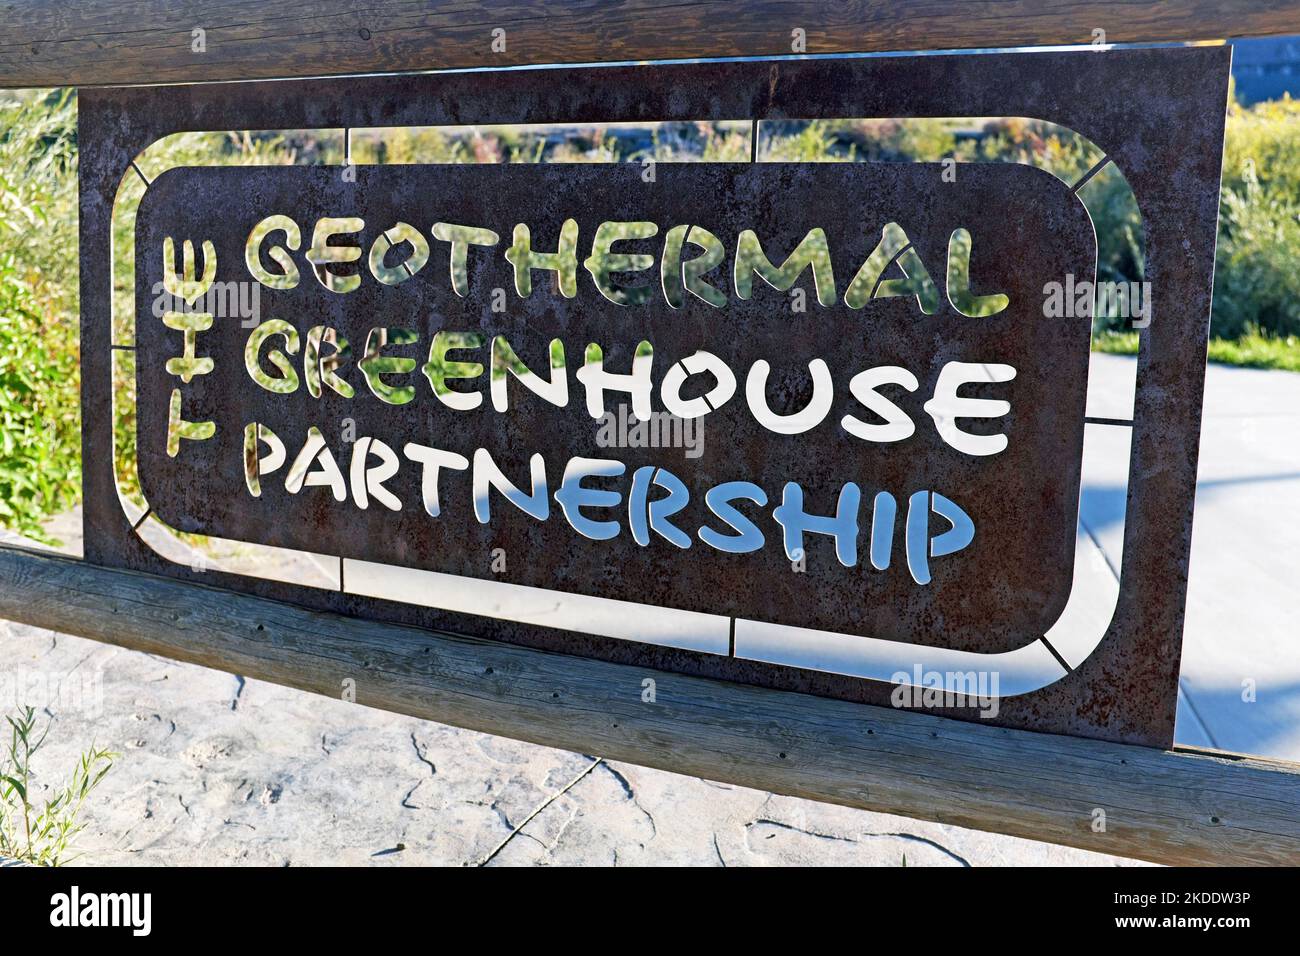 The Geothermal Greenhouse Partnership, based in Pagosa Springs, Colorado, mission is to educate the community in sustainable agricultural practices Stock Photo